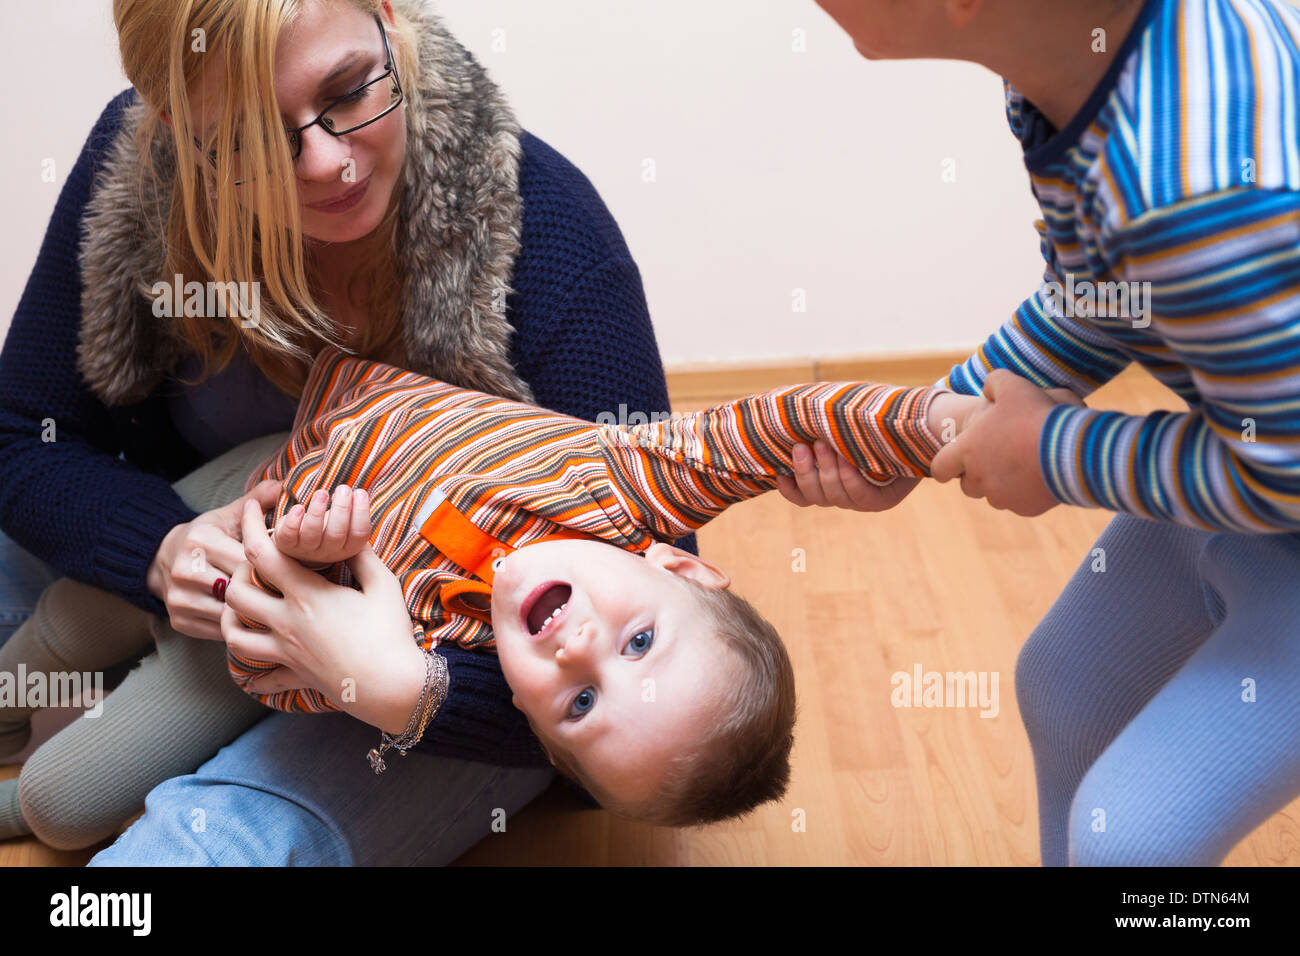 Woman and two kids fighting. Stock Photo